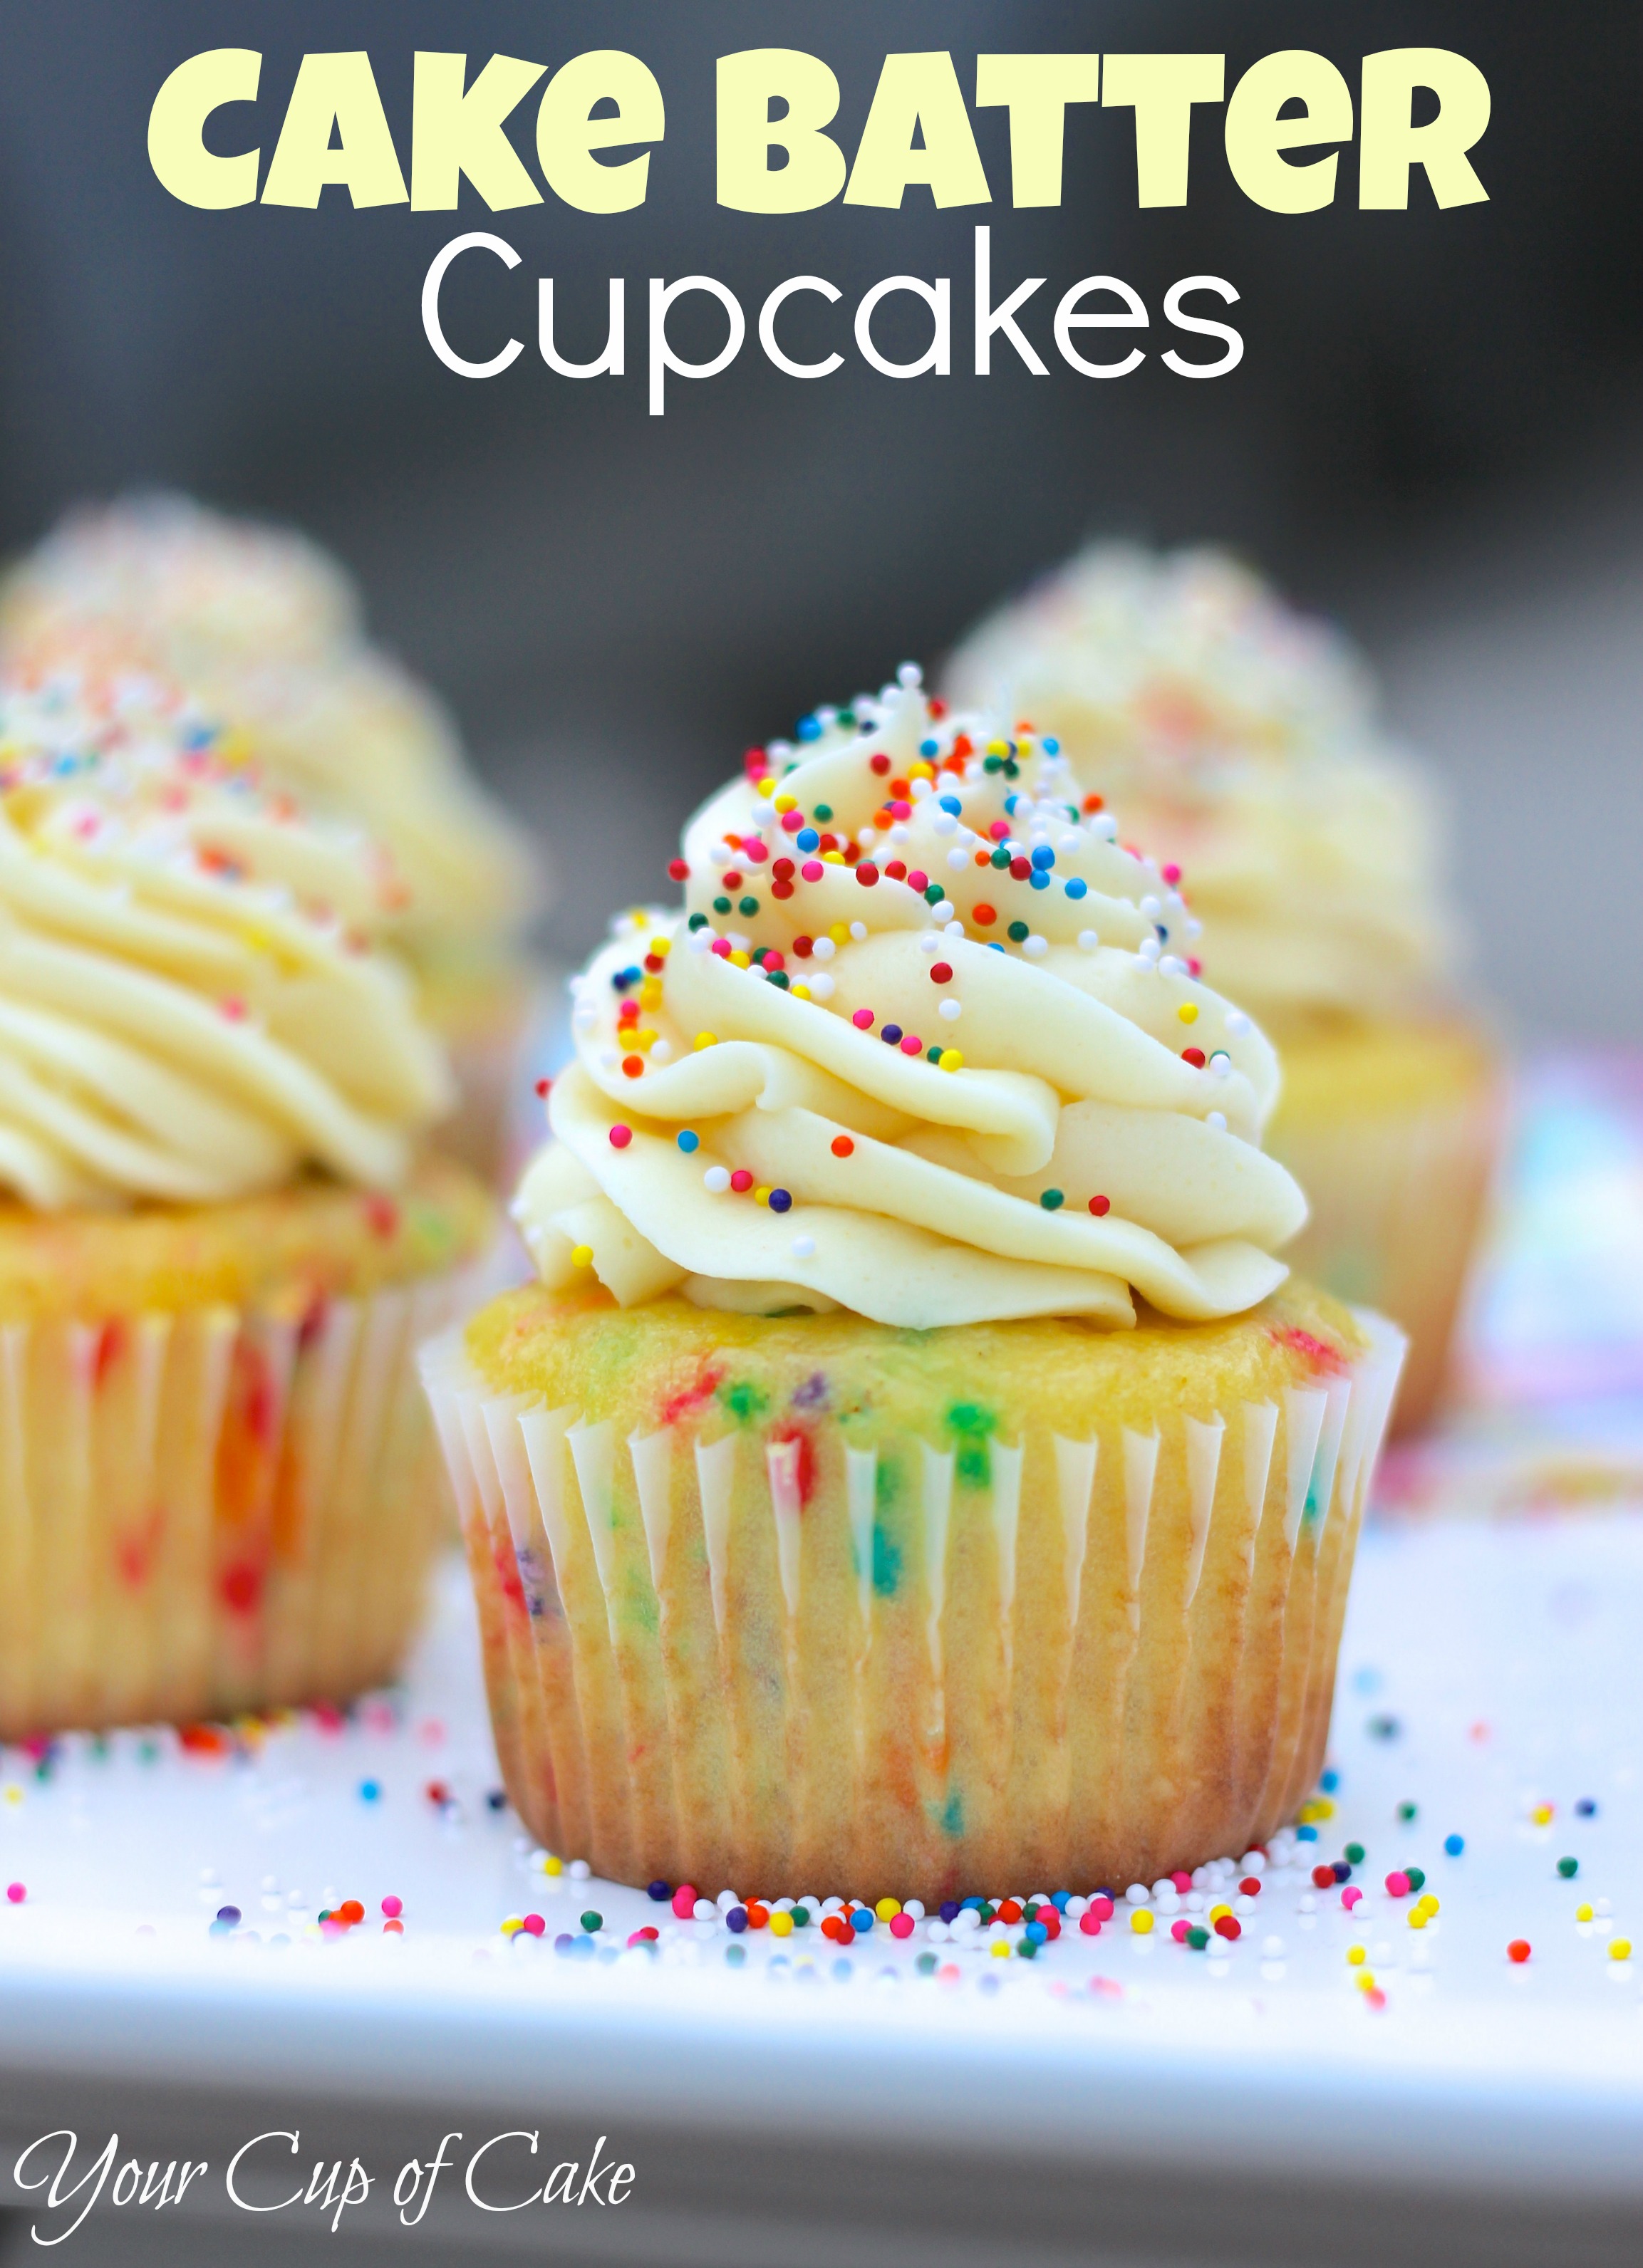 Cake in a cup - Cake in a cup updated their cover photo.